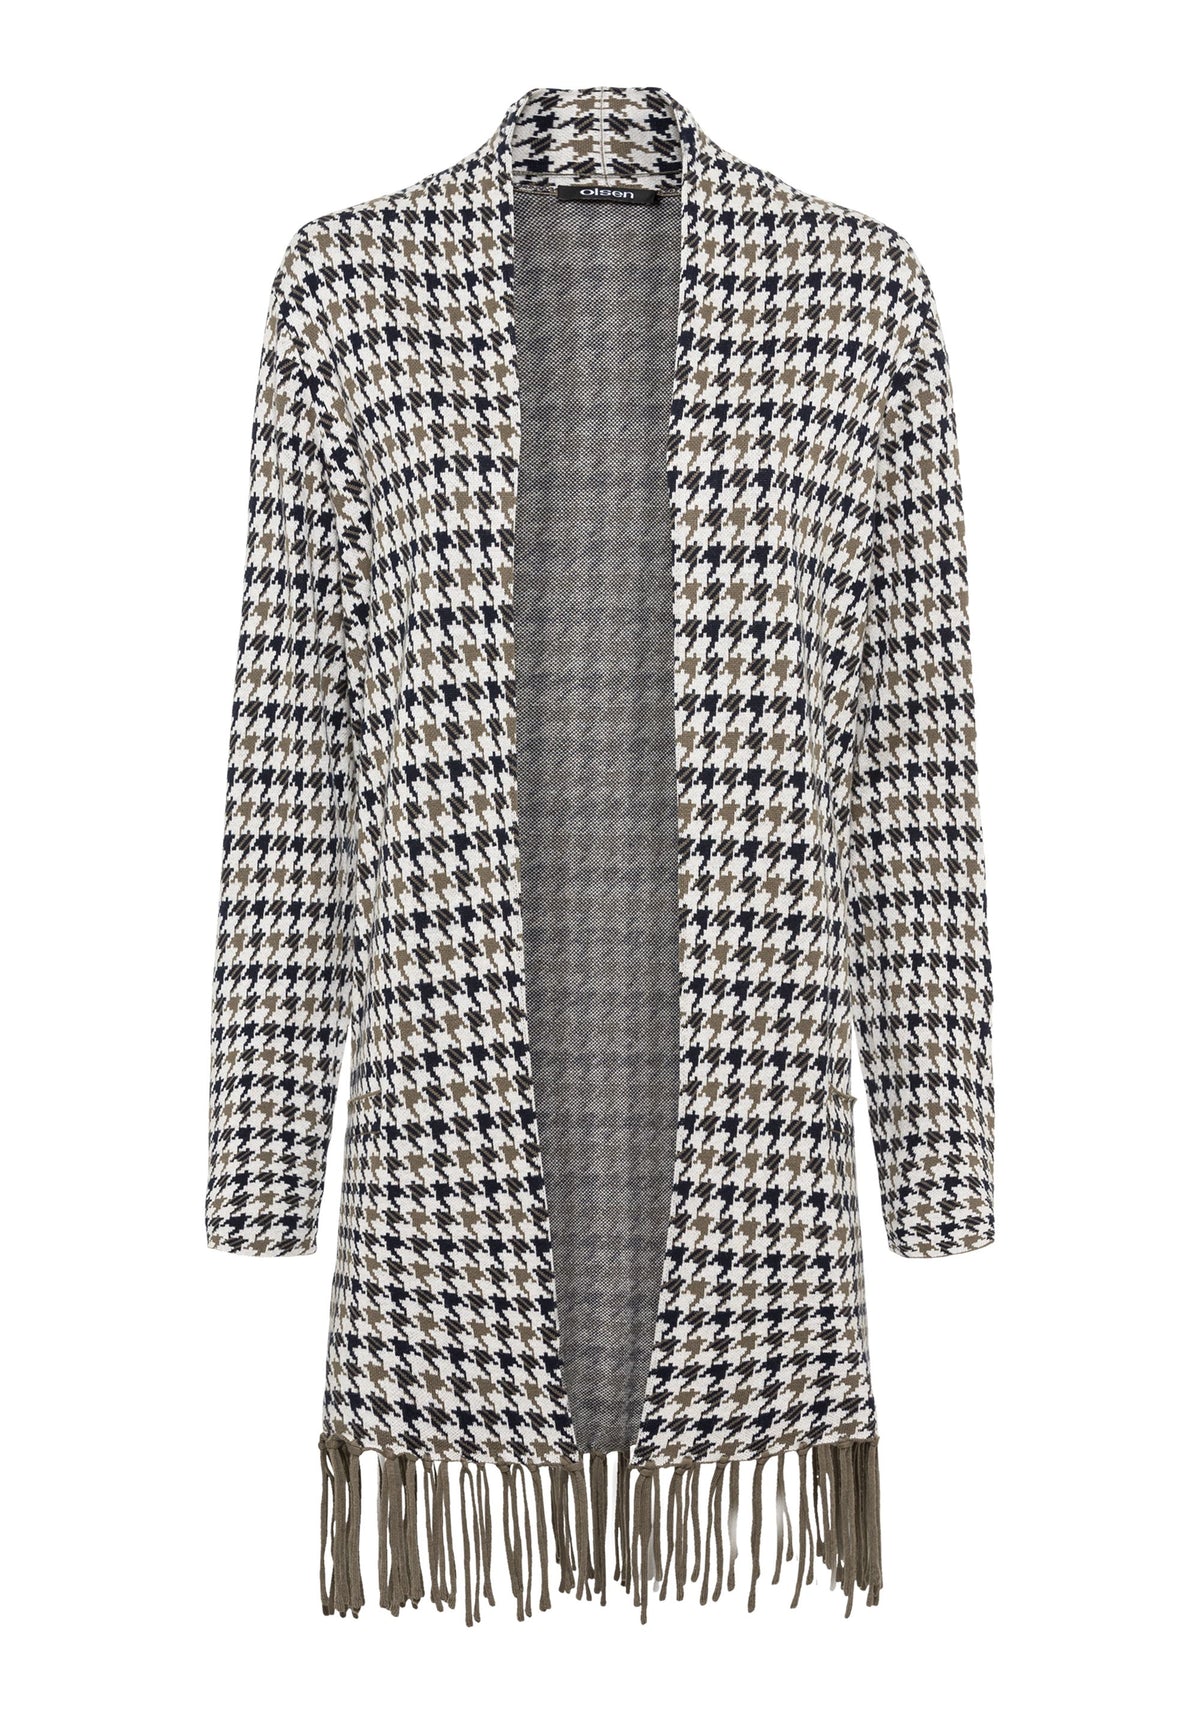 Cotton Blend Long Sleeve Long Line Open Front Houndstooth Cardigan